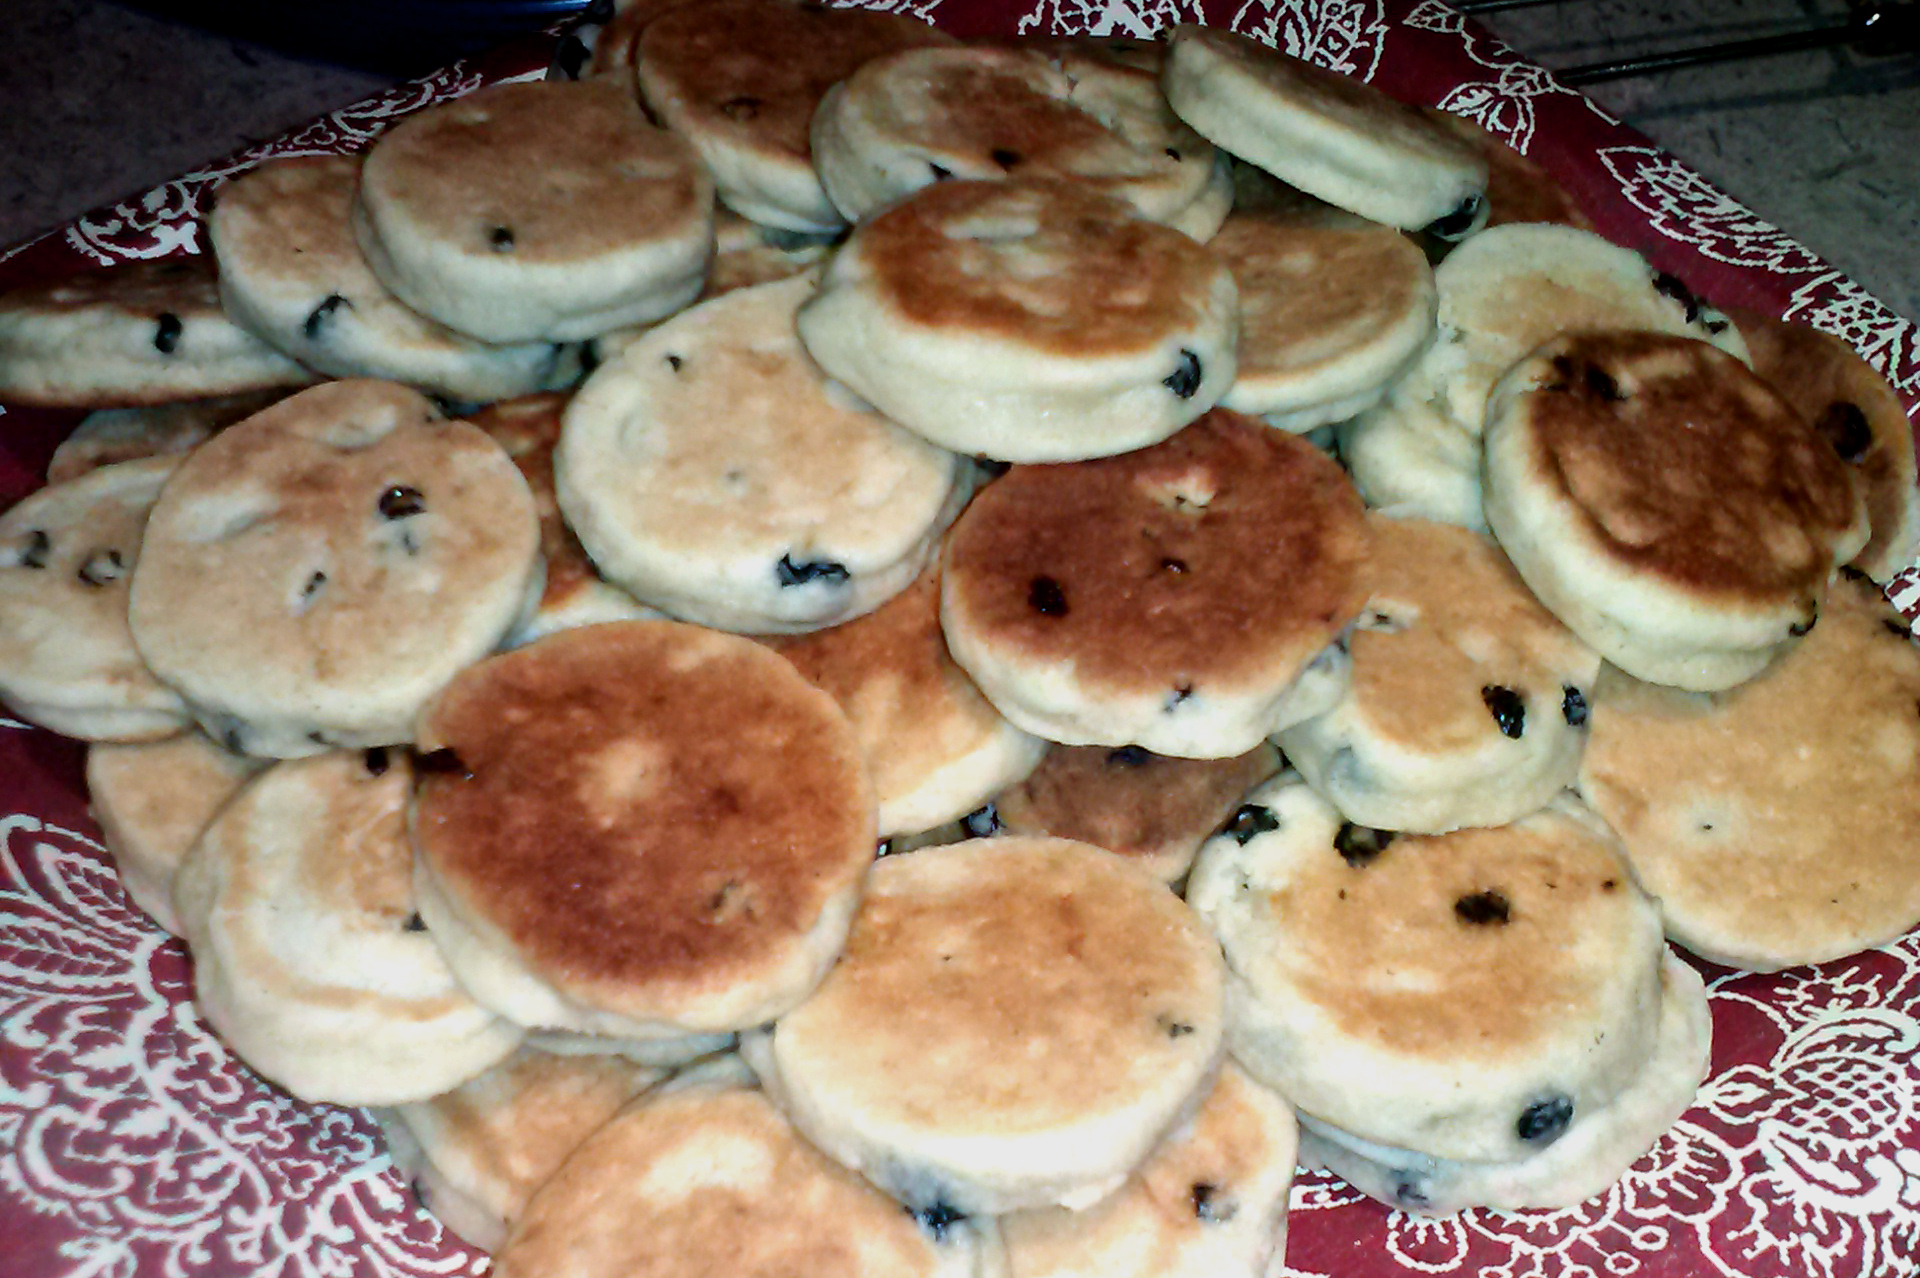 Welsh cakes hot off the griddle.